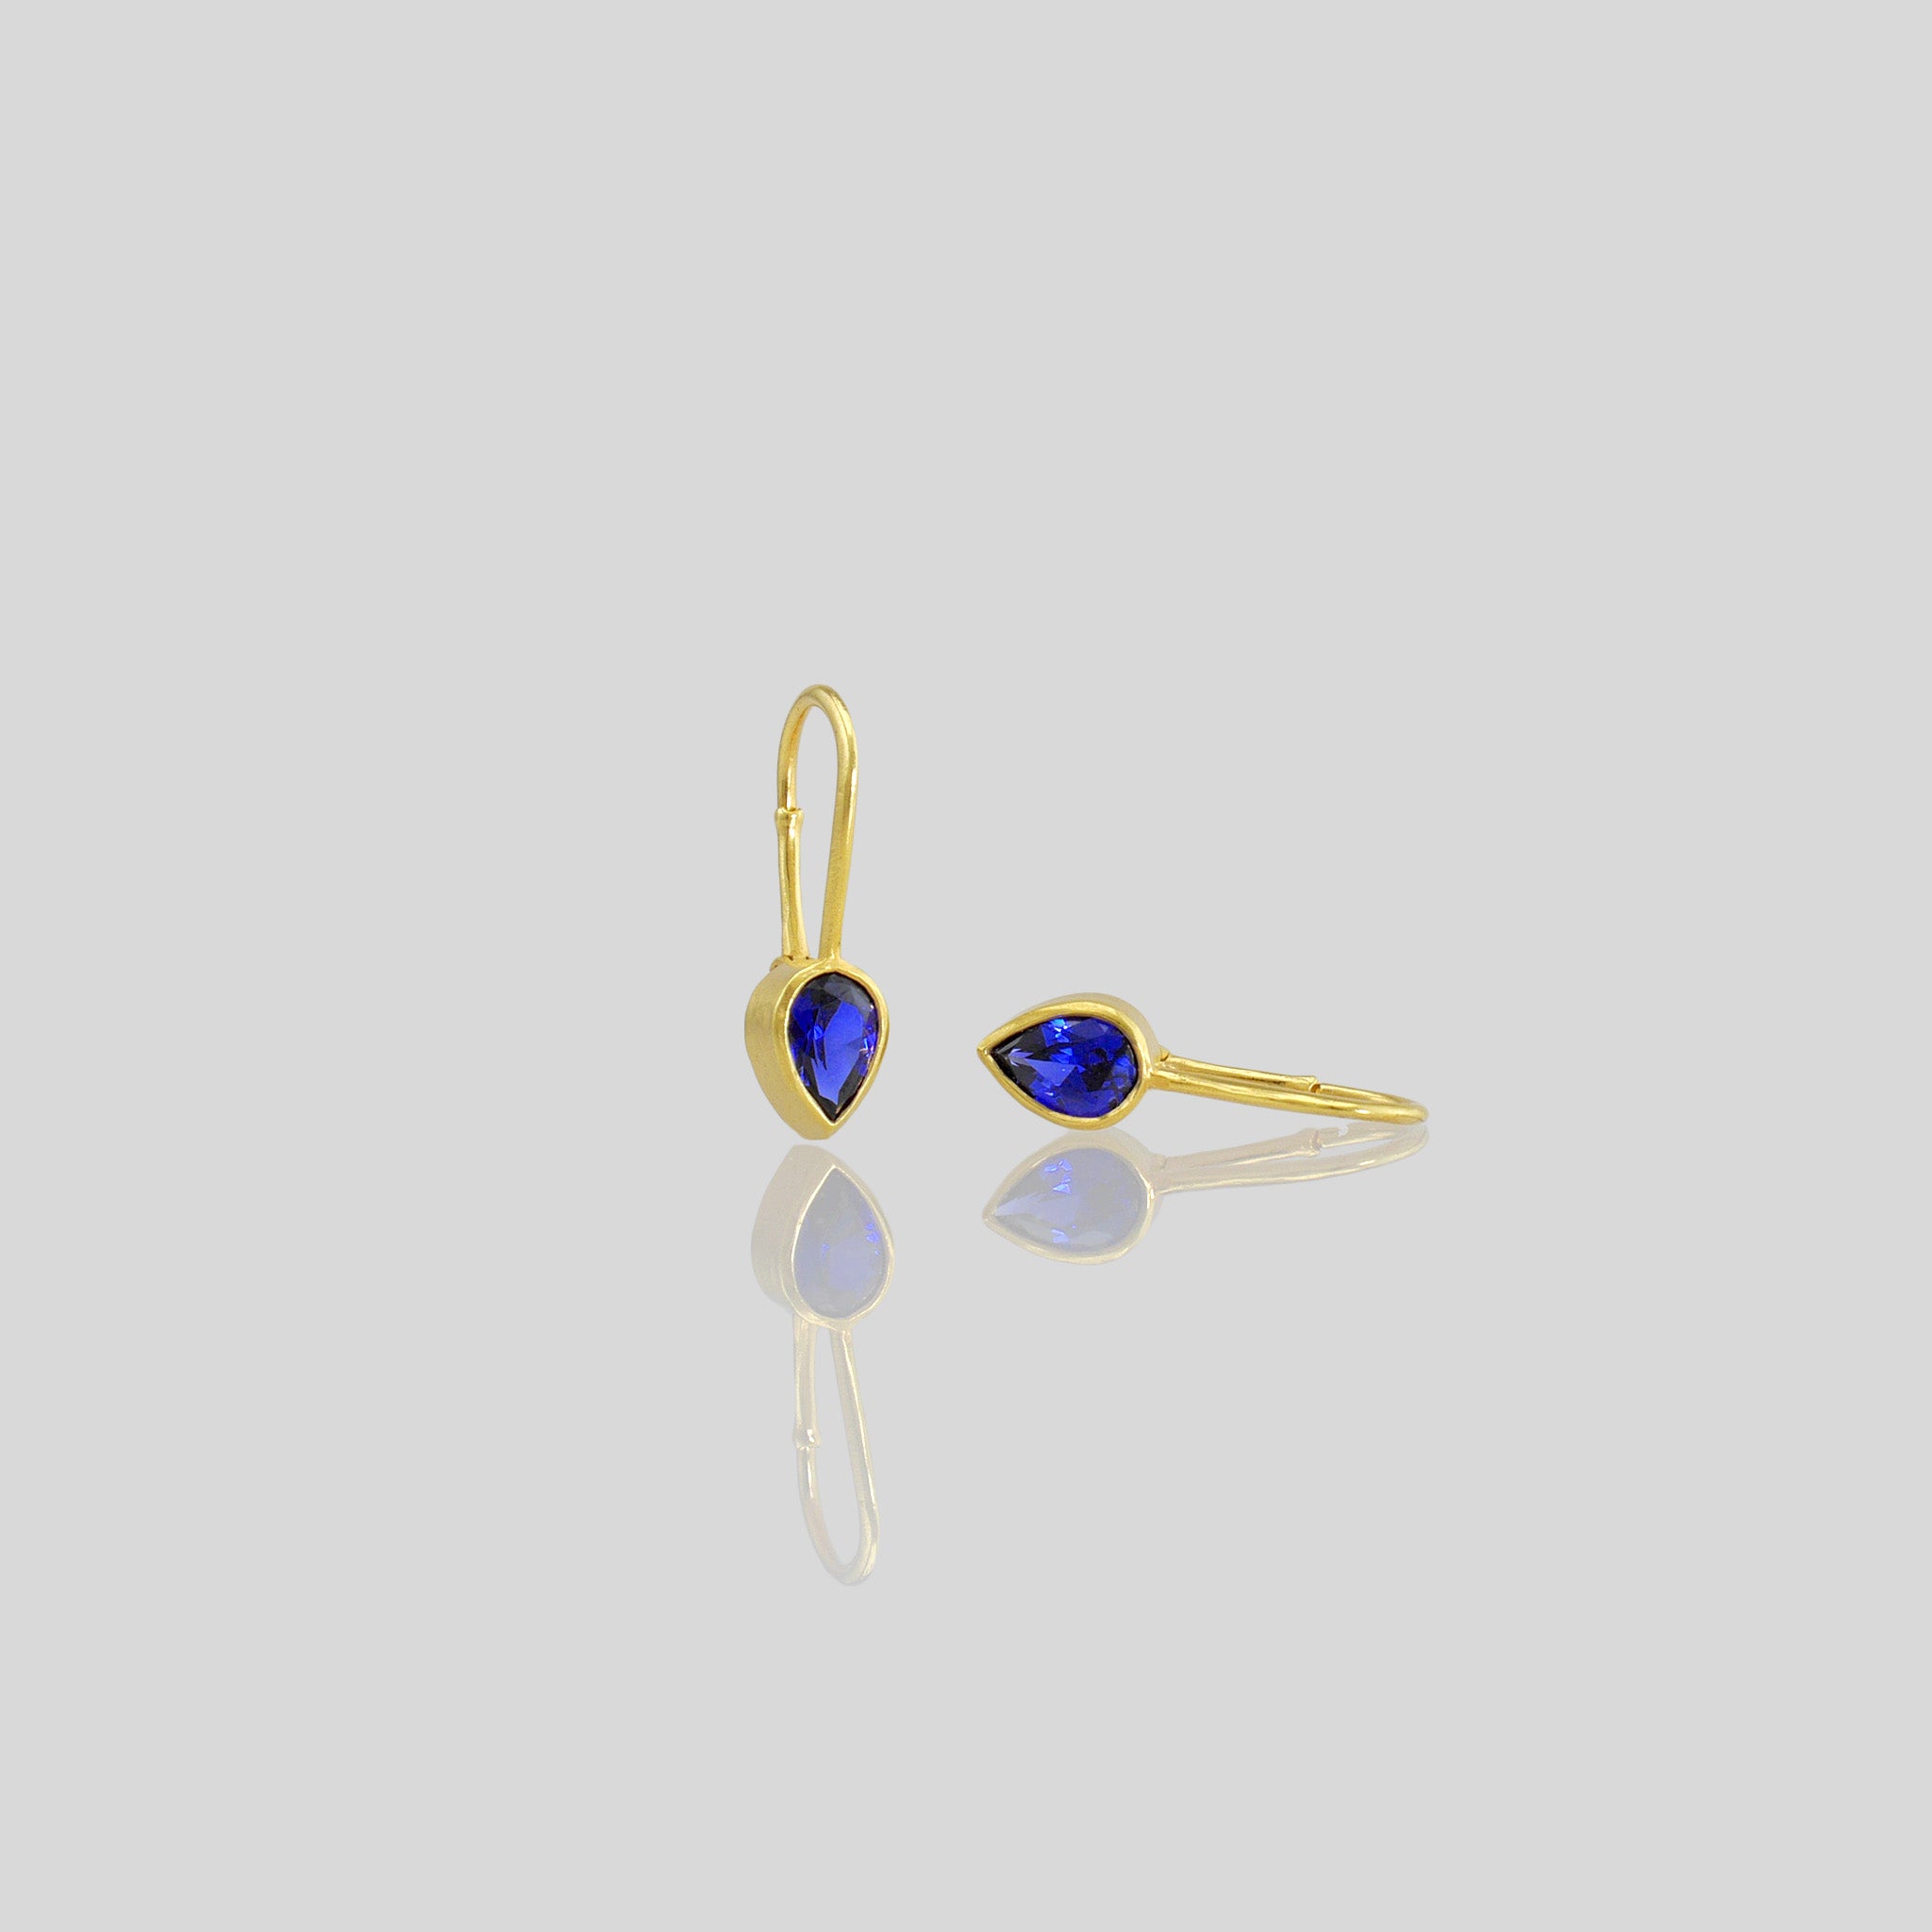 Lightweight gold earrings featuring a drop-shaped Sapphire gemstone and promote spiritual harmony